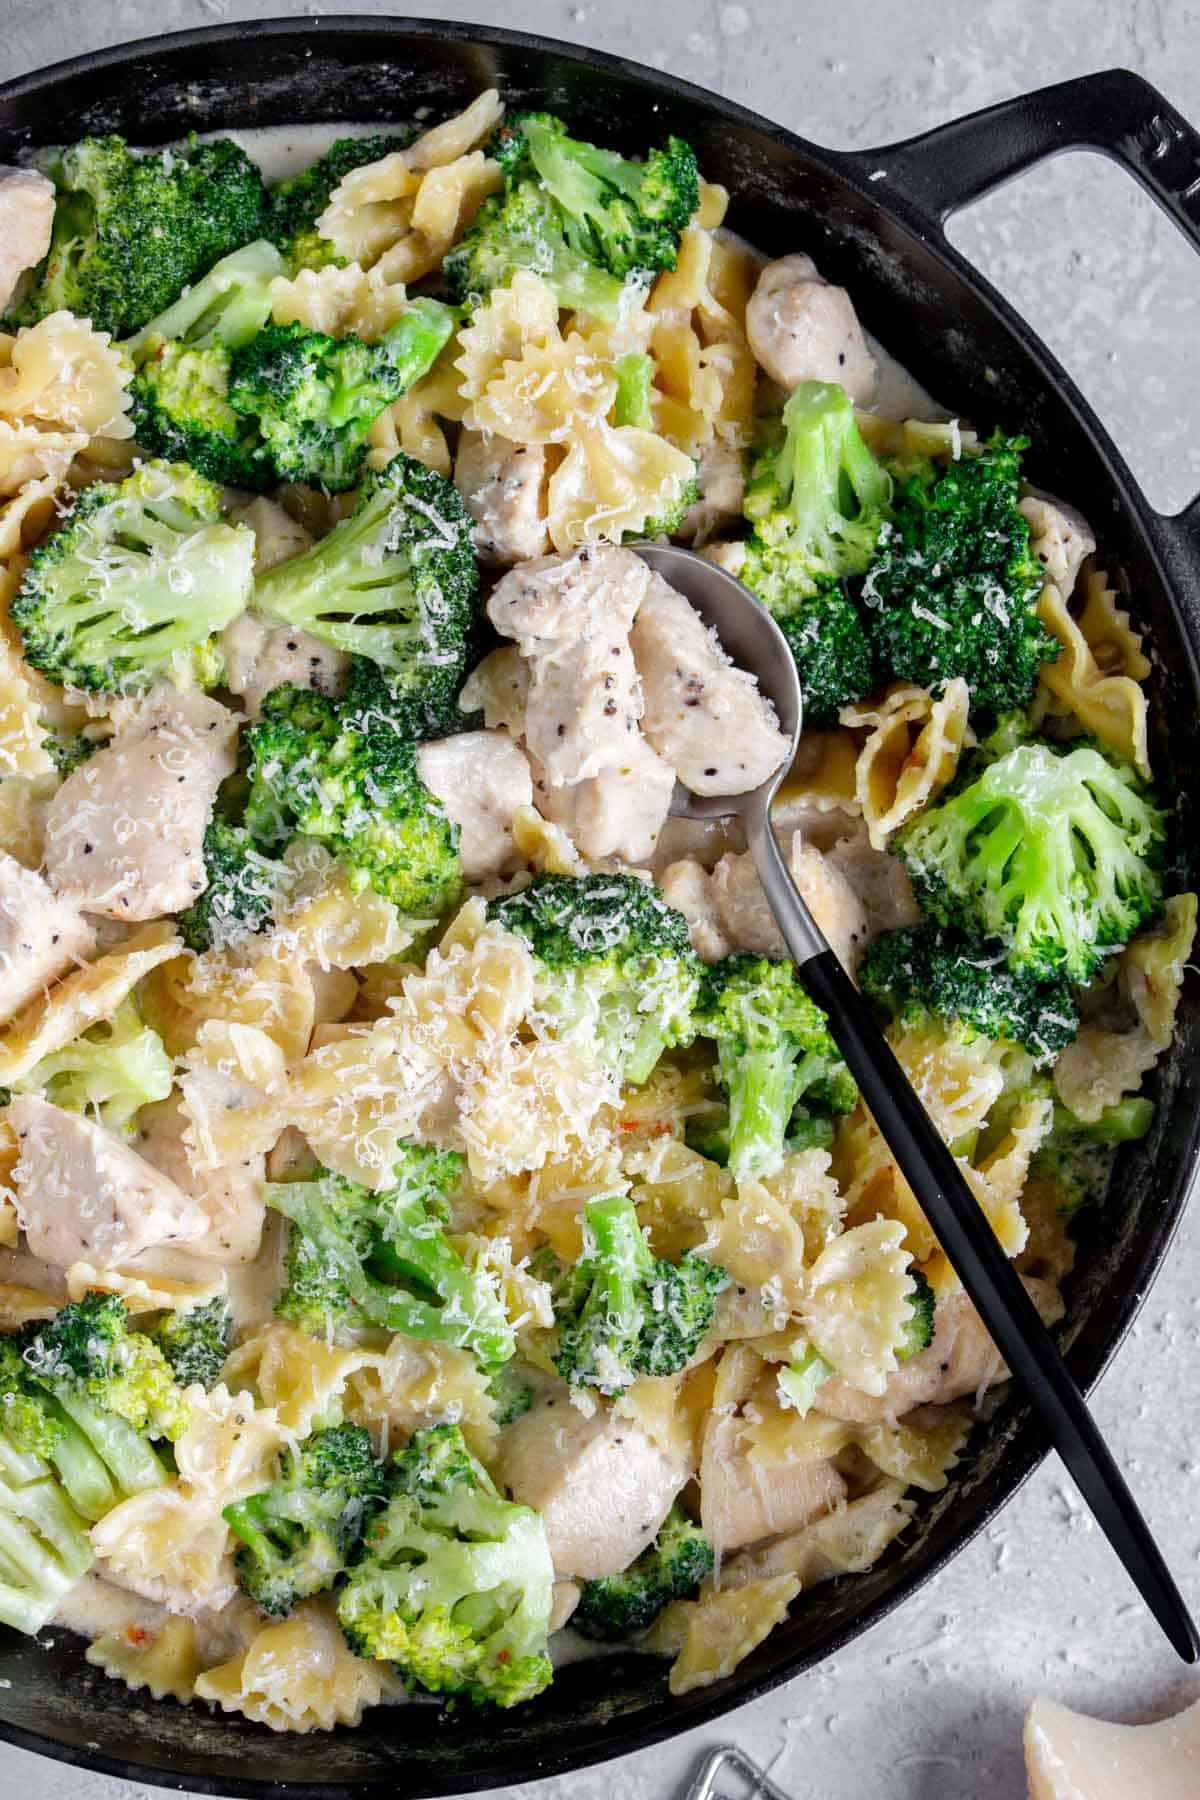 Overhead view of a large round pan of chicken broccoli alfredo with a spoon tucked in.